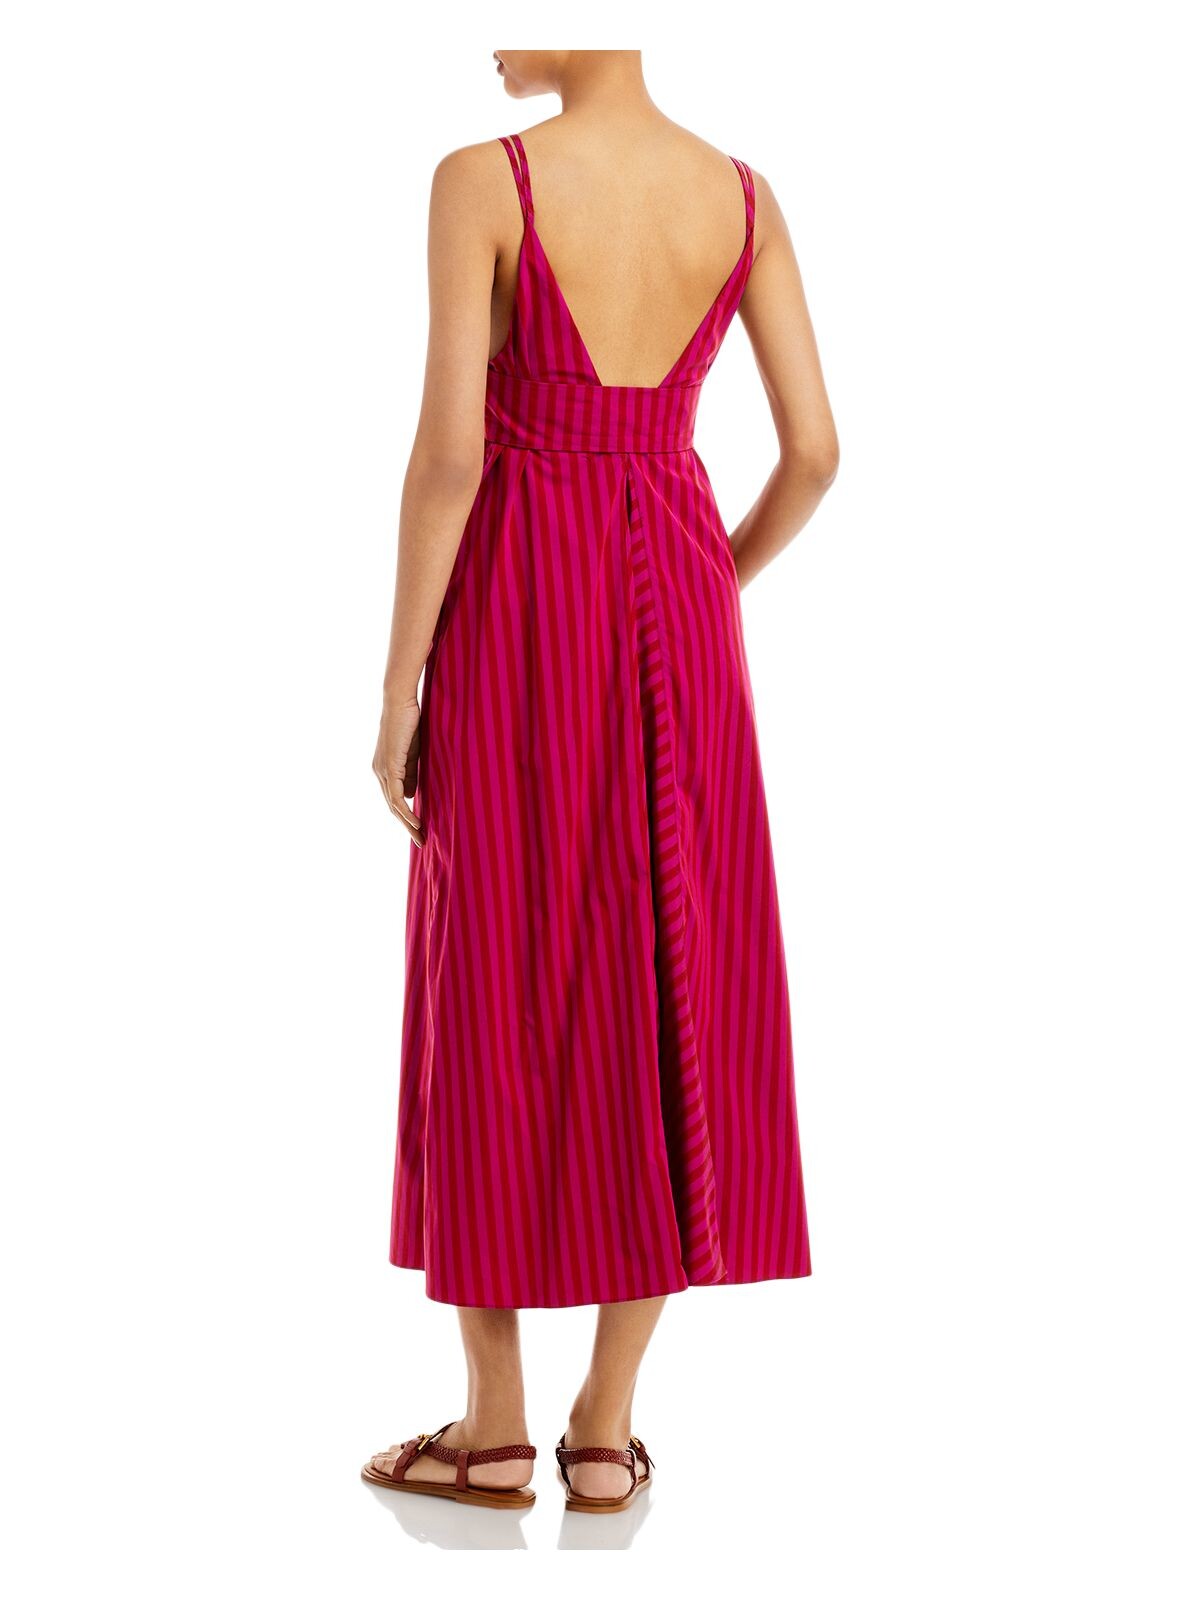 REBECCA TAYLOR Womens Pink Tie Open Back Unlined Textured Striped V Neck Tea-Length Fit + Flare Dress 2